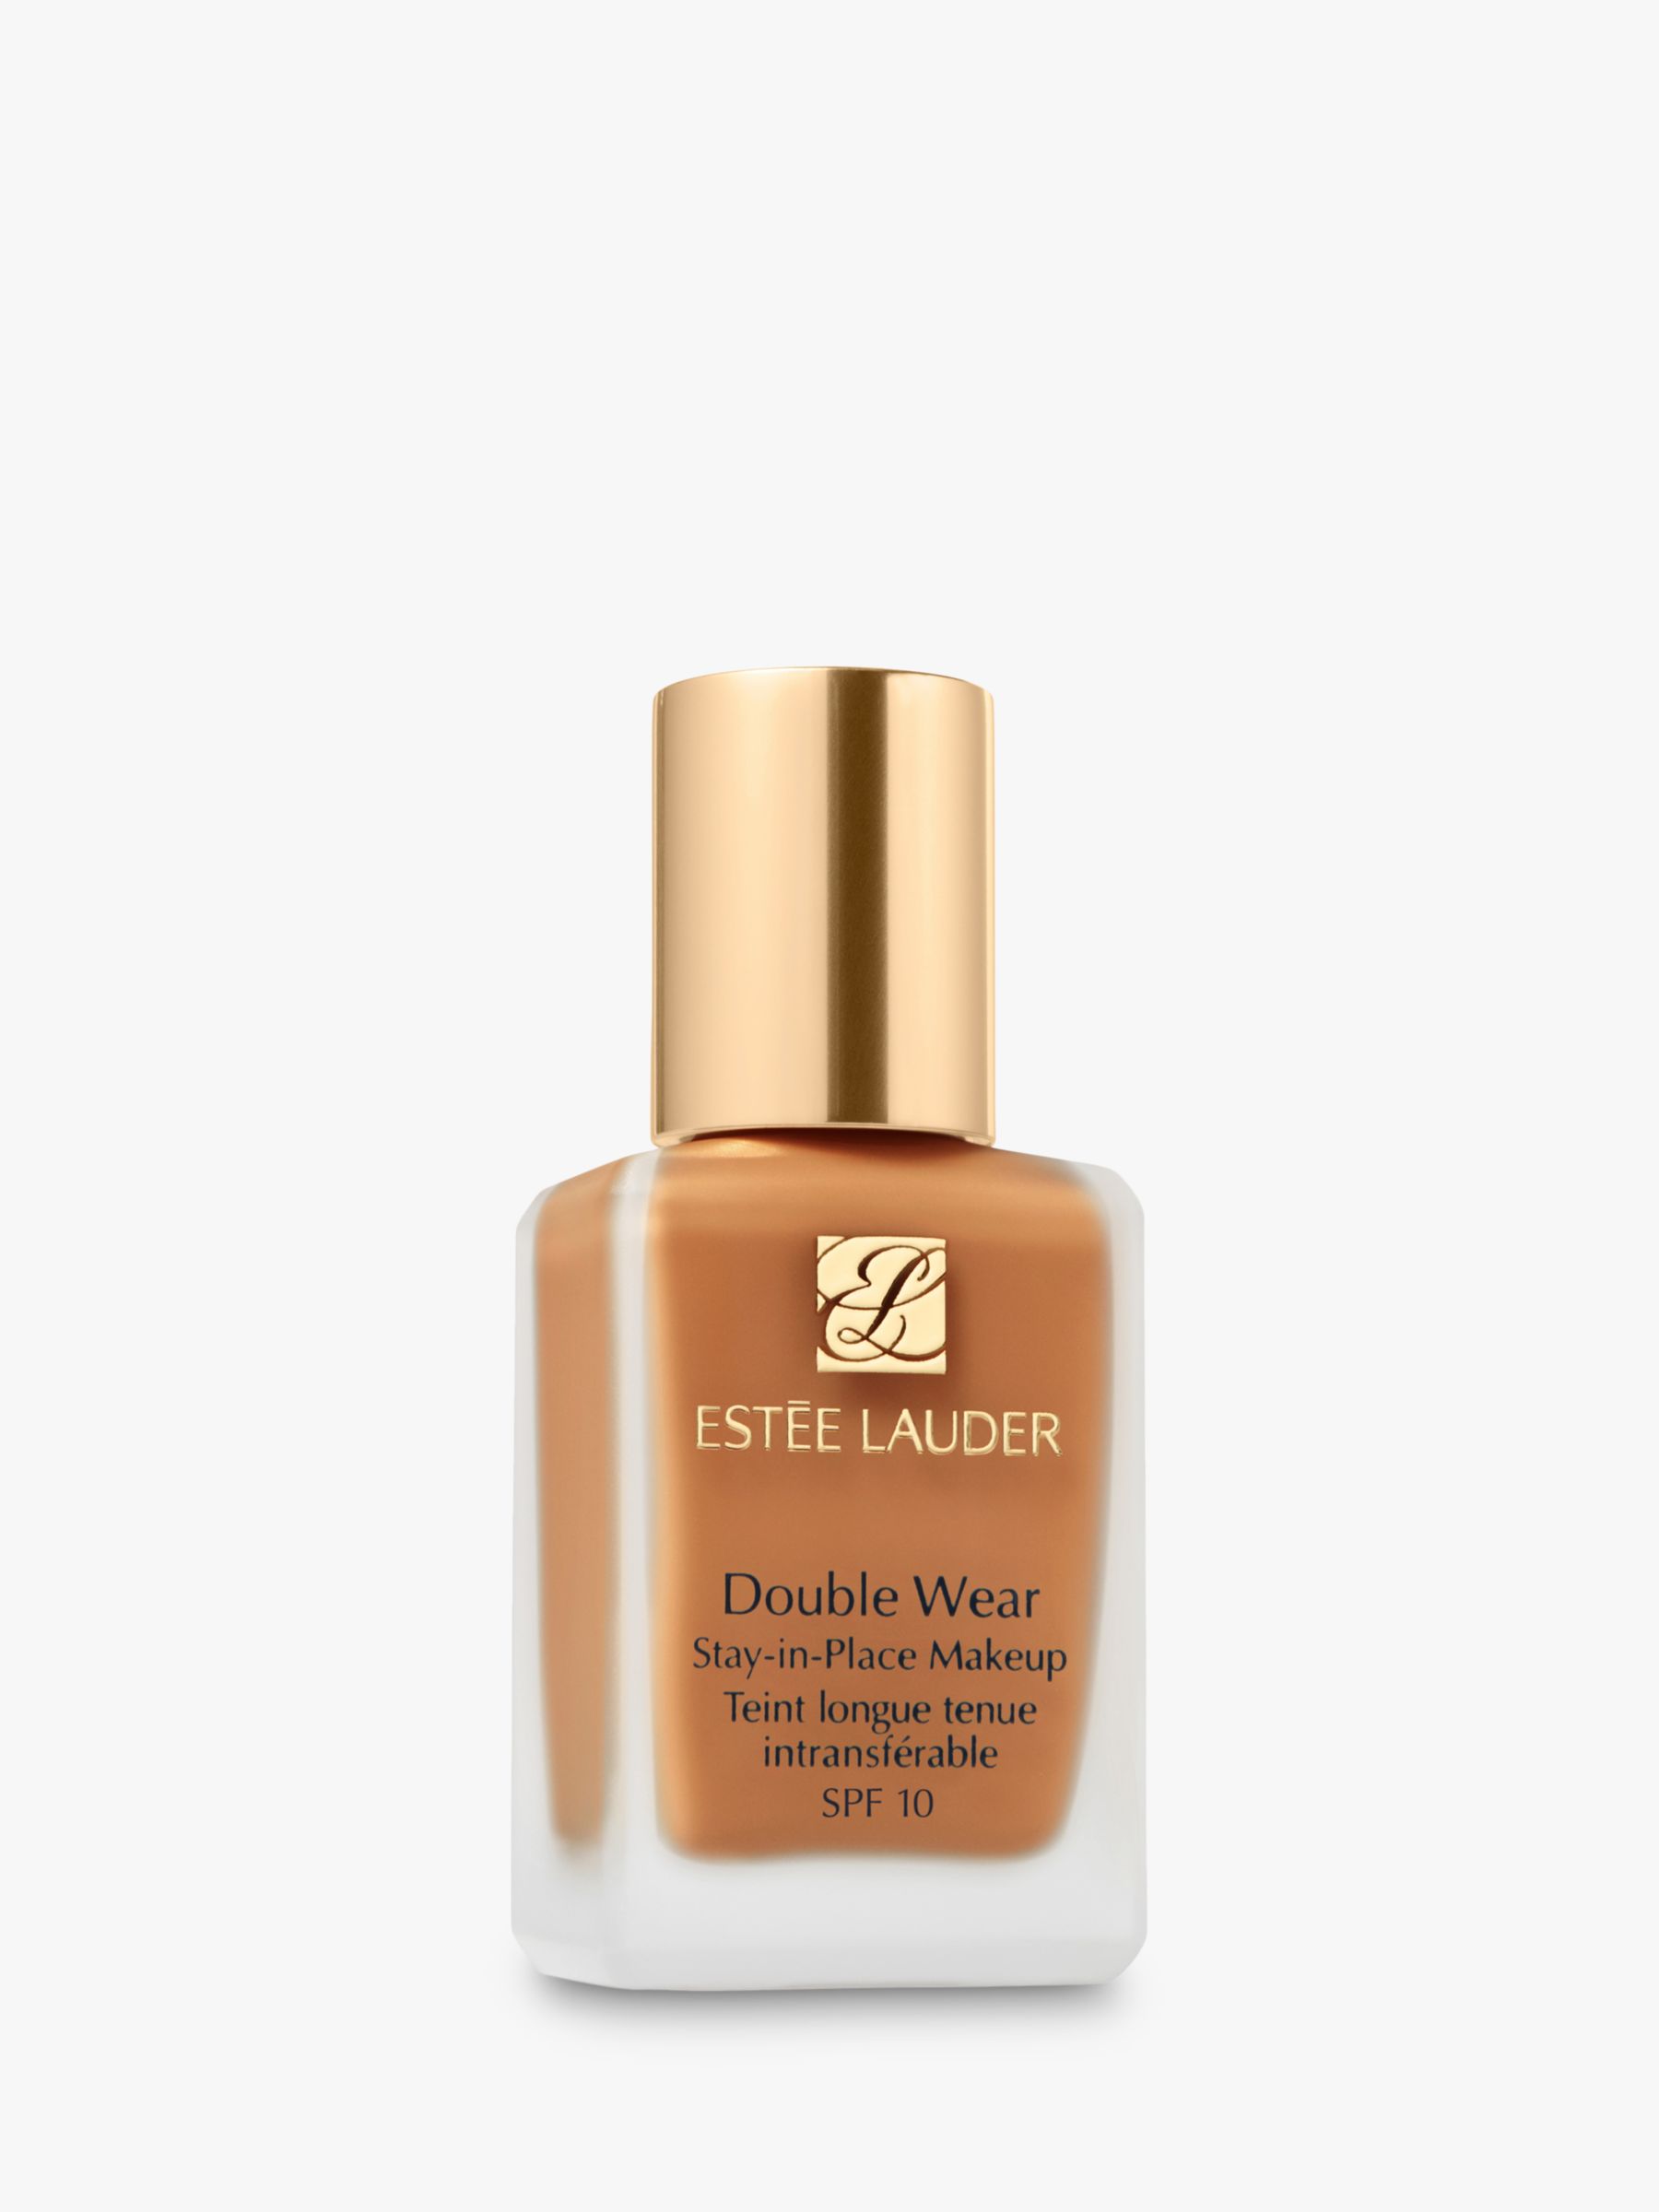 Estee Lauder Double Wear Foundation Beauty And Health